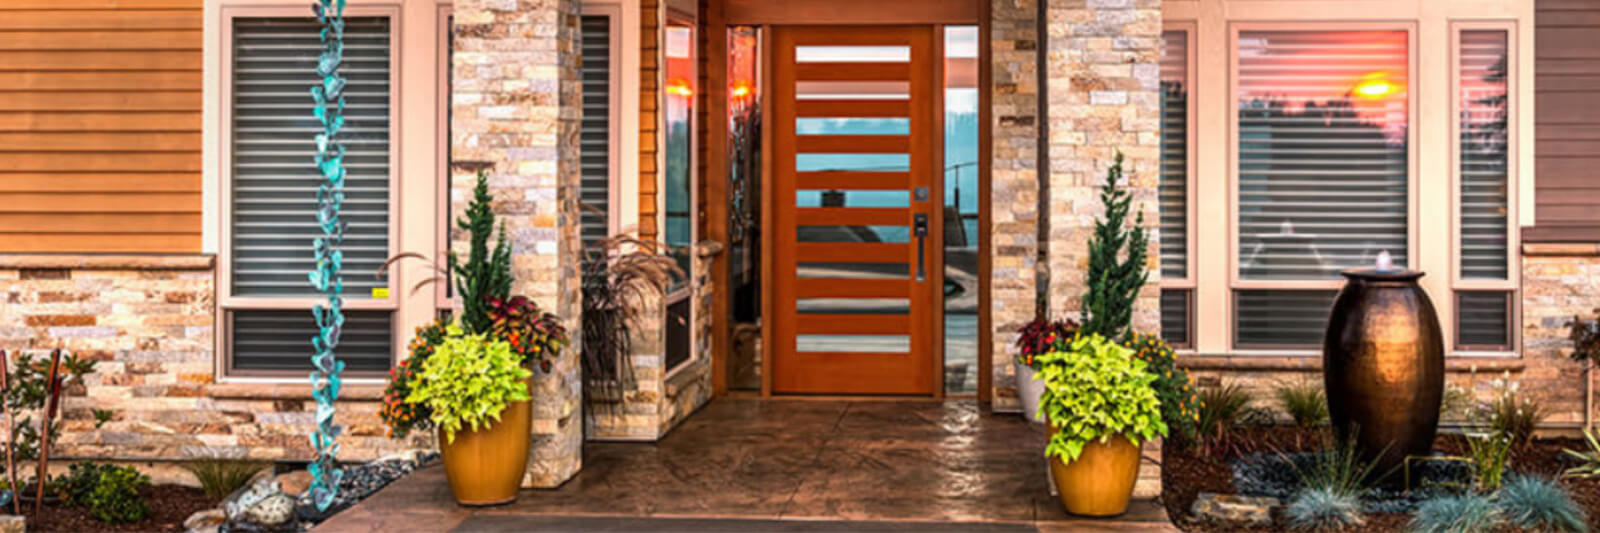 front entry way